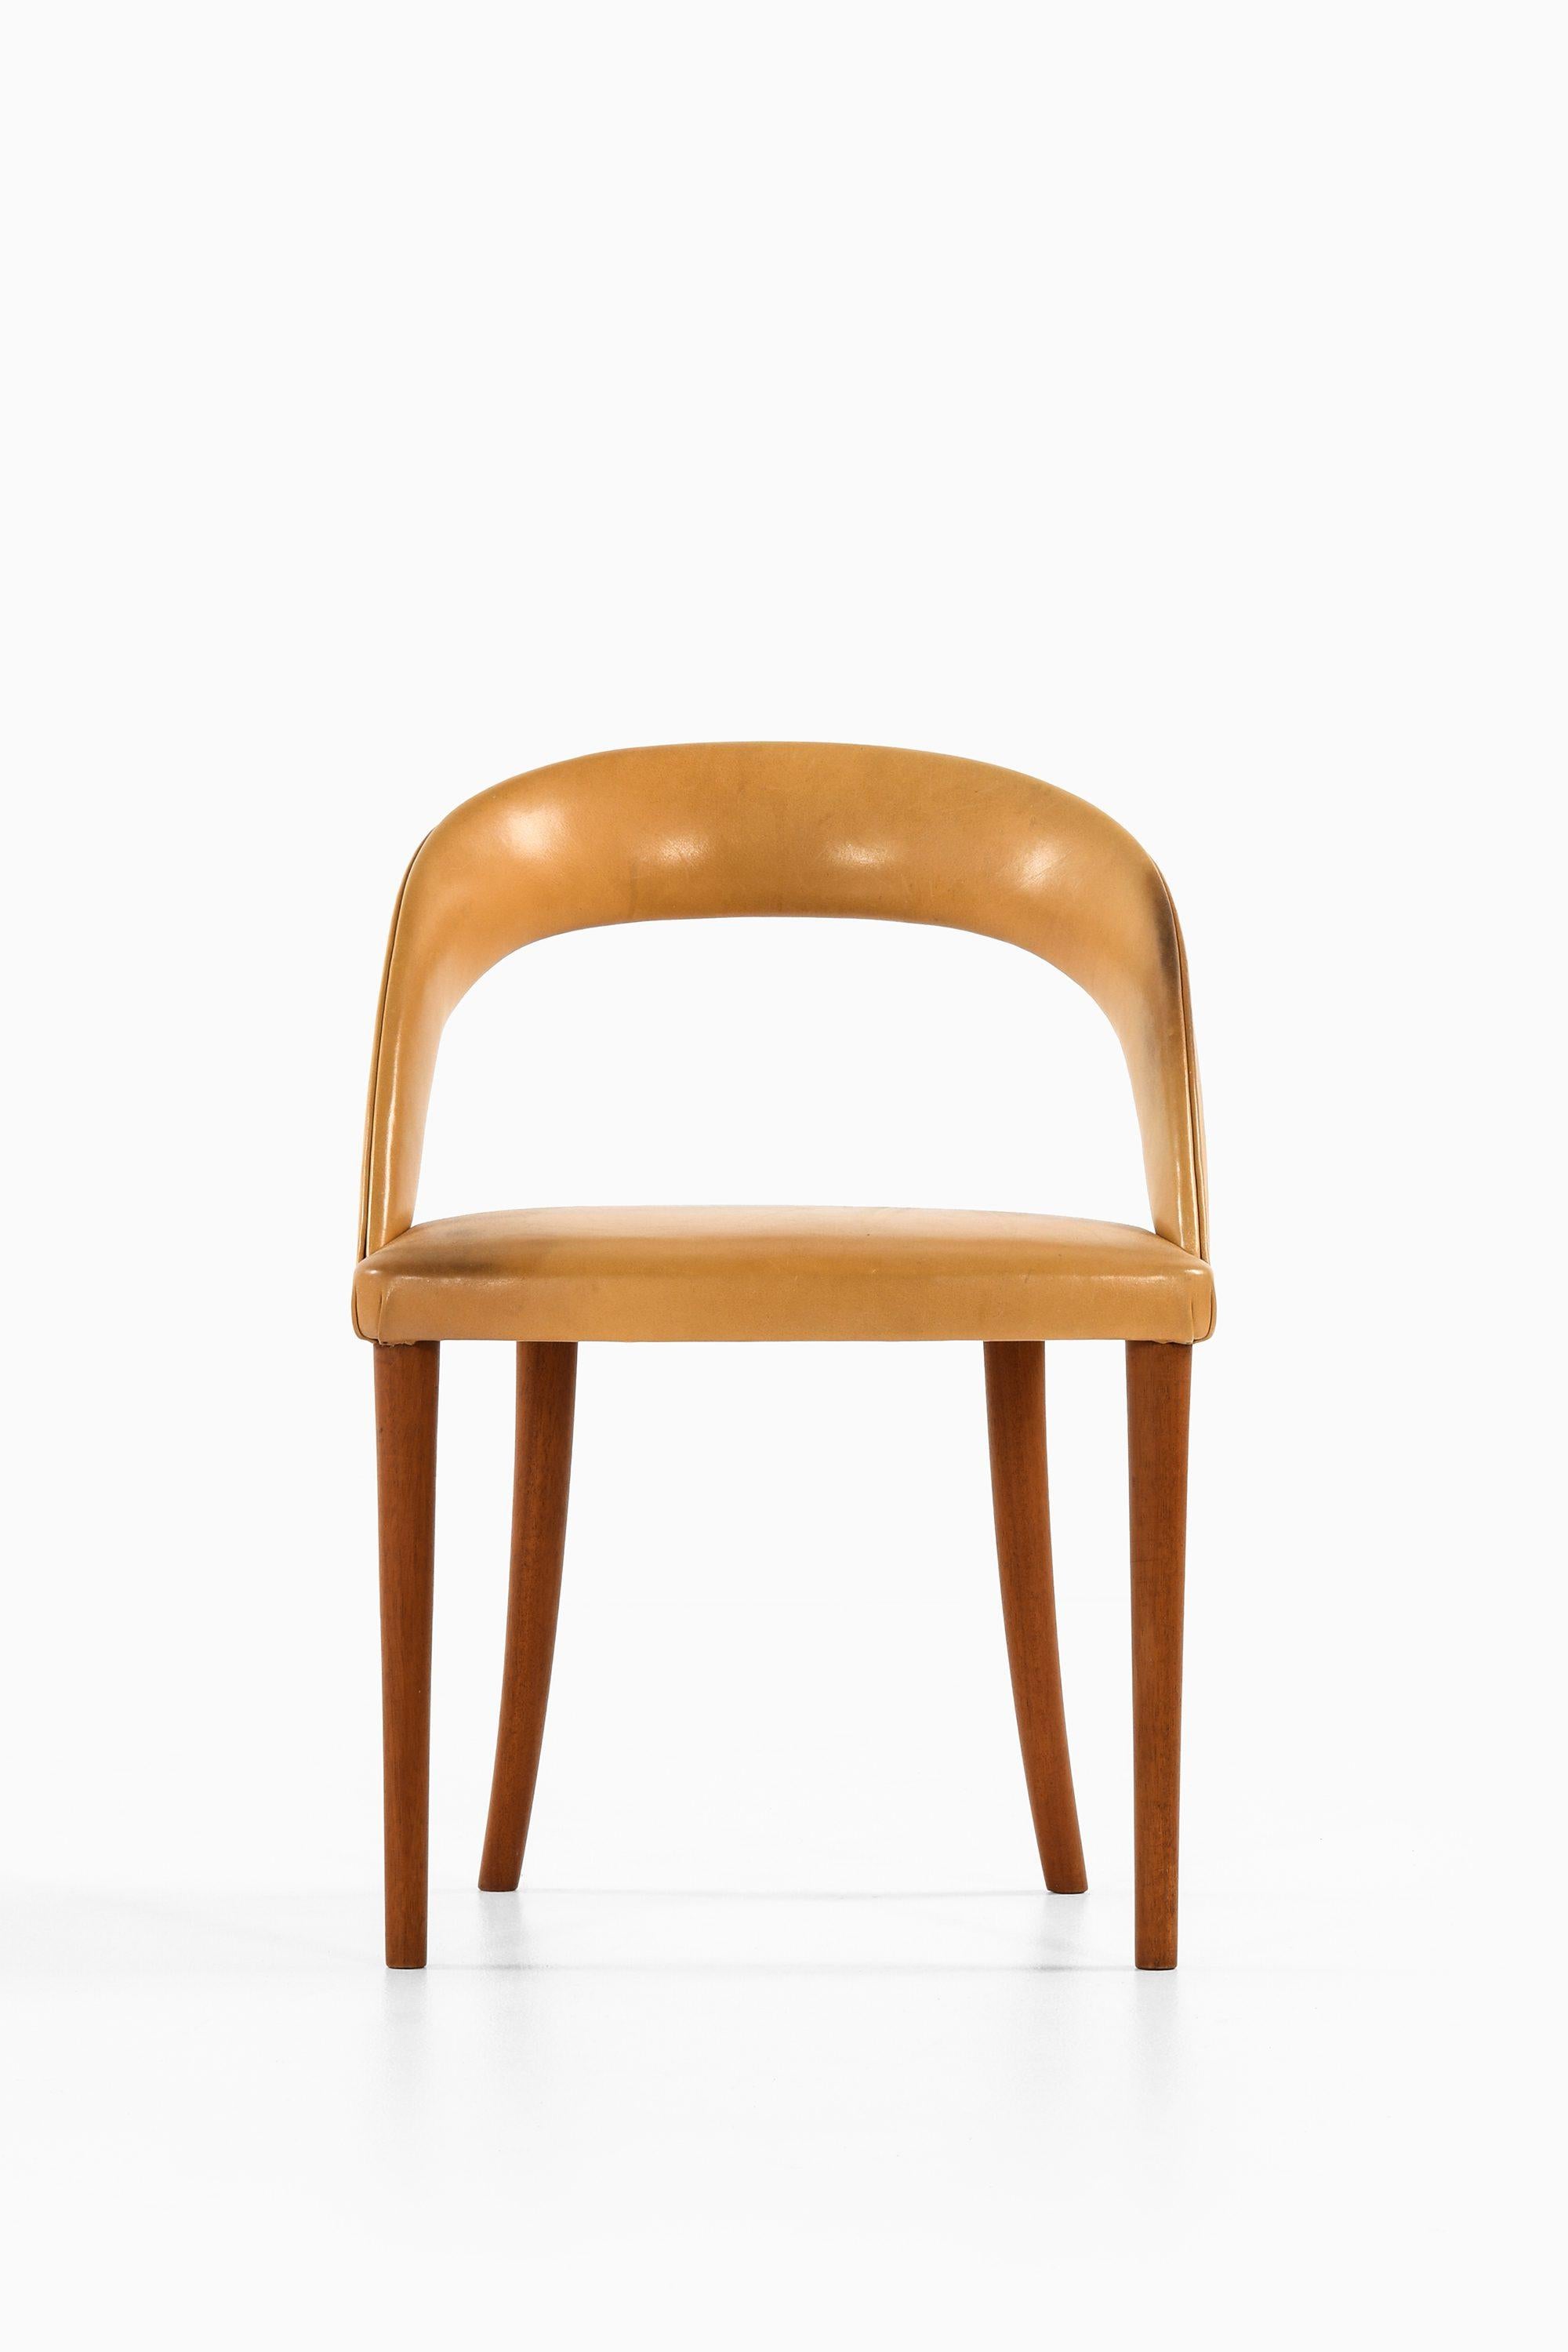 Side Chair in Mahogany and Leather by Frode Holm, 1950s

Additional Information:
Material: Mahogany, leather
Style: midcentury, Scandinavian
Produced by Illums Bolighus in Denmark
Dimensions (W x D x H): 51 x 49 x 71.5 cm
Seat Height: 41